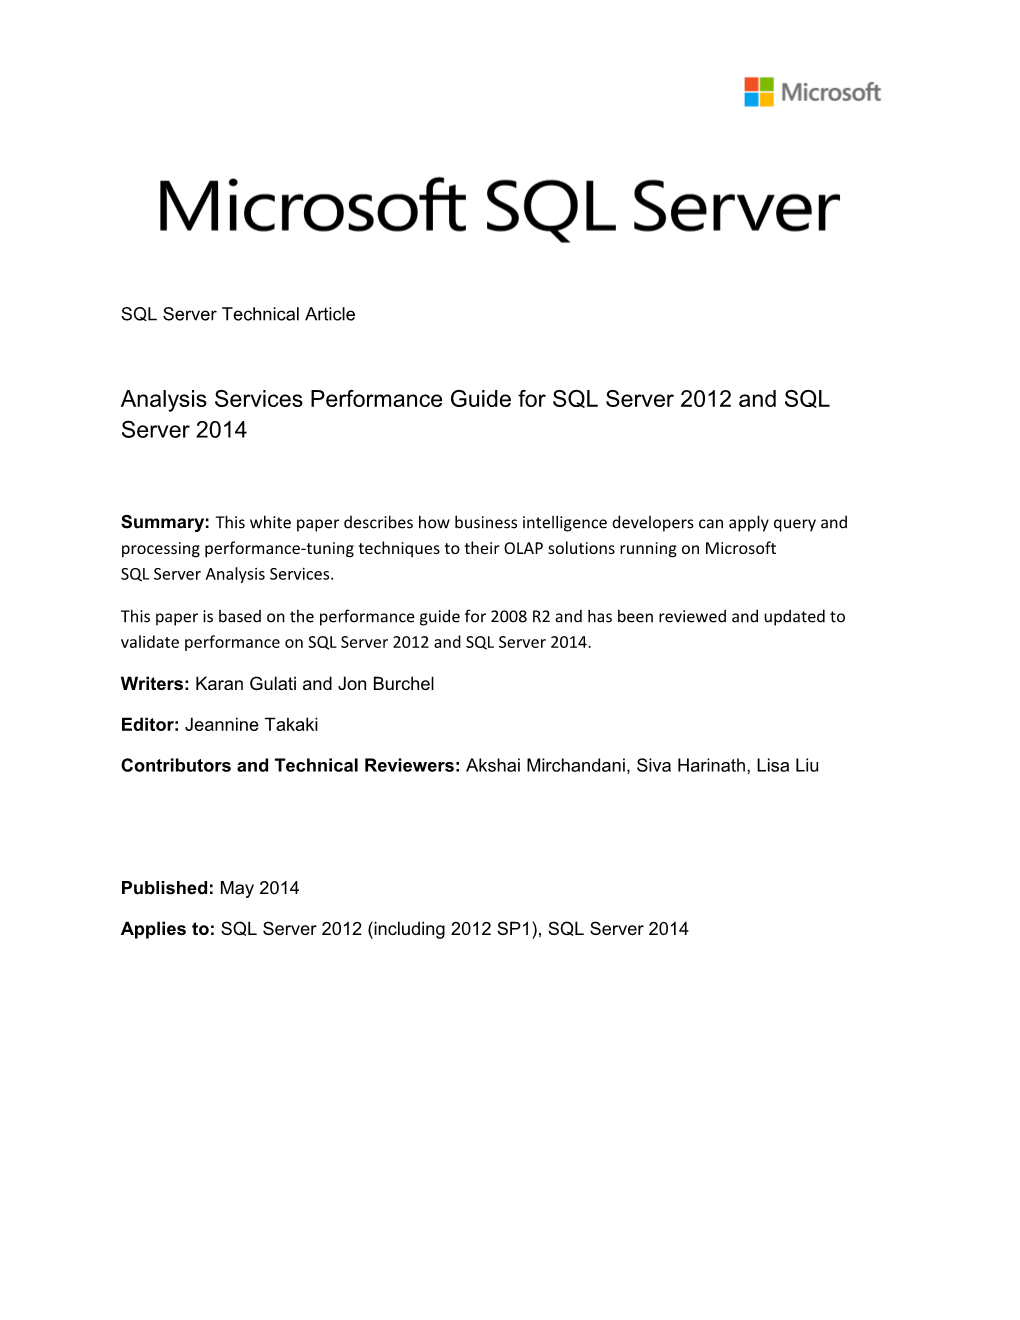 Analysis Services Performance Guide for SQL Server 2012 and 2014